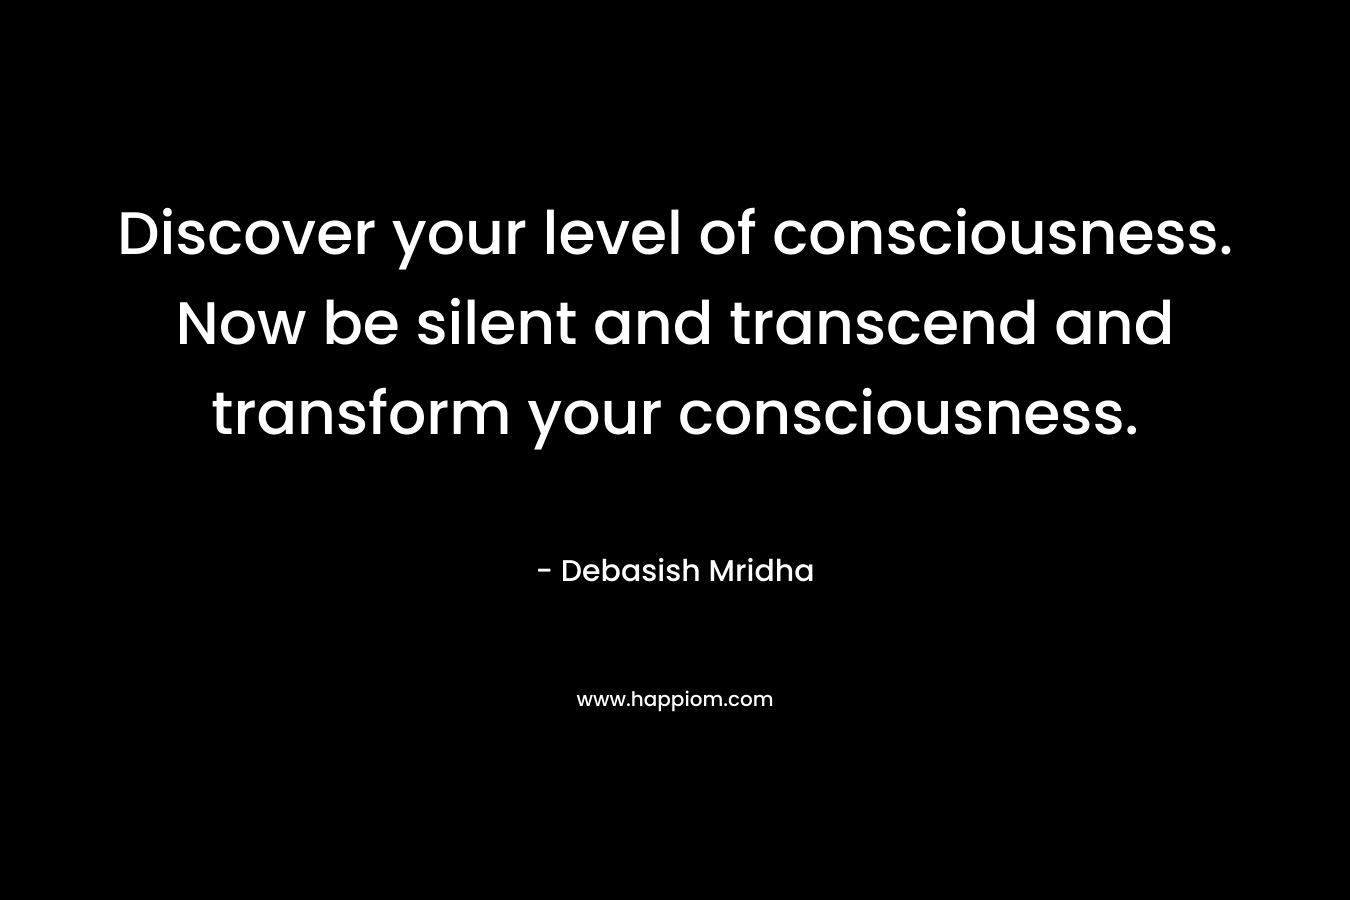 Discover your level of consciousness. Now be silent and transcend and transform your consciousness.